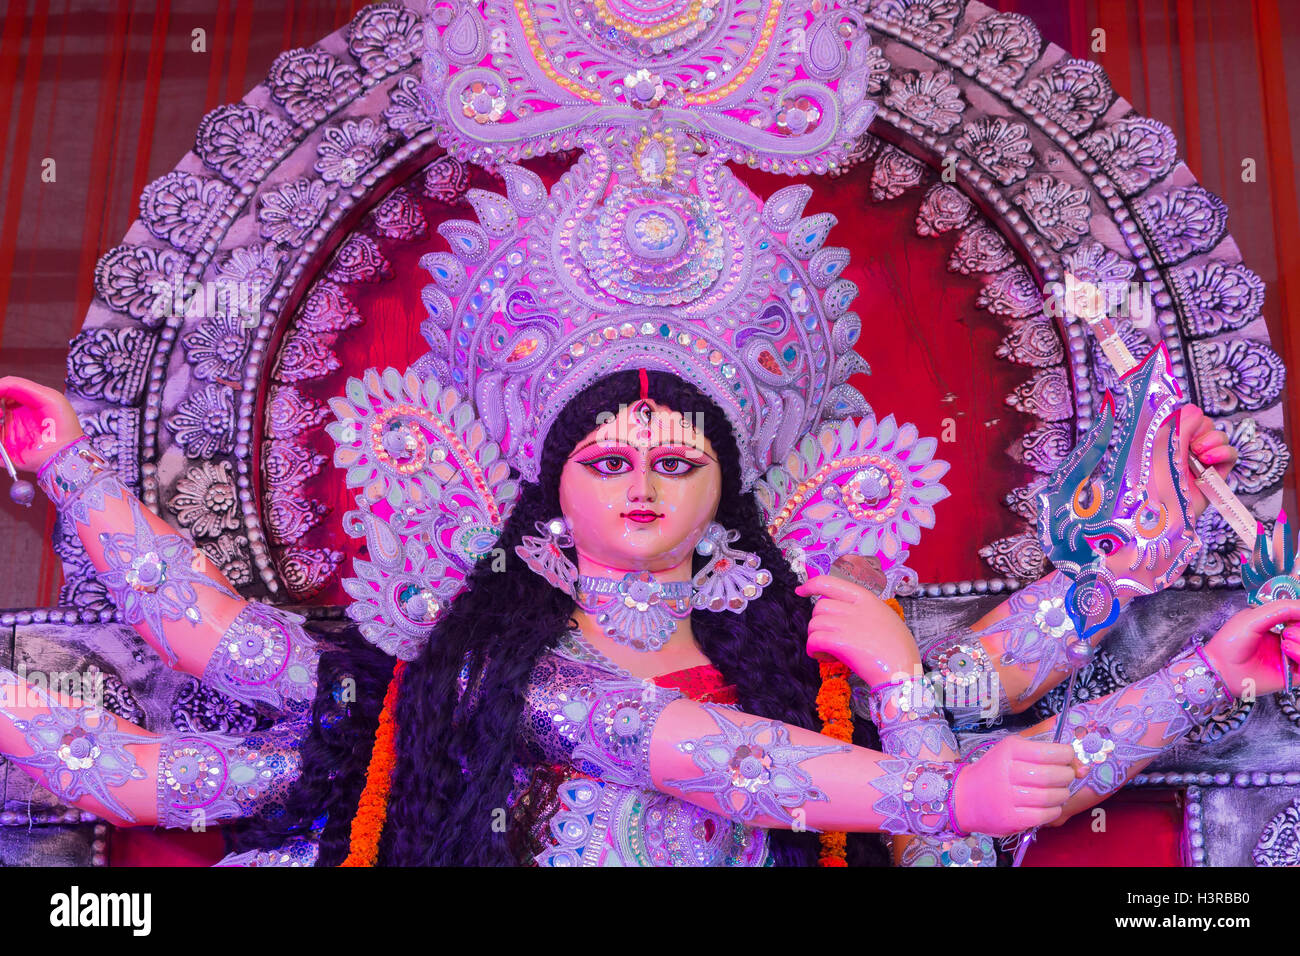 Goddess Durga Look in a Location Stock Photo